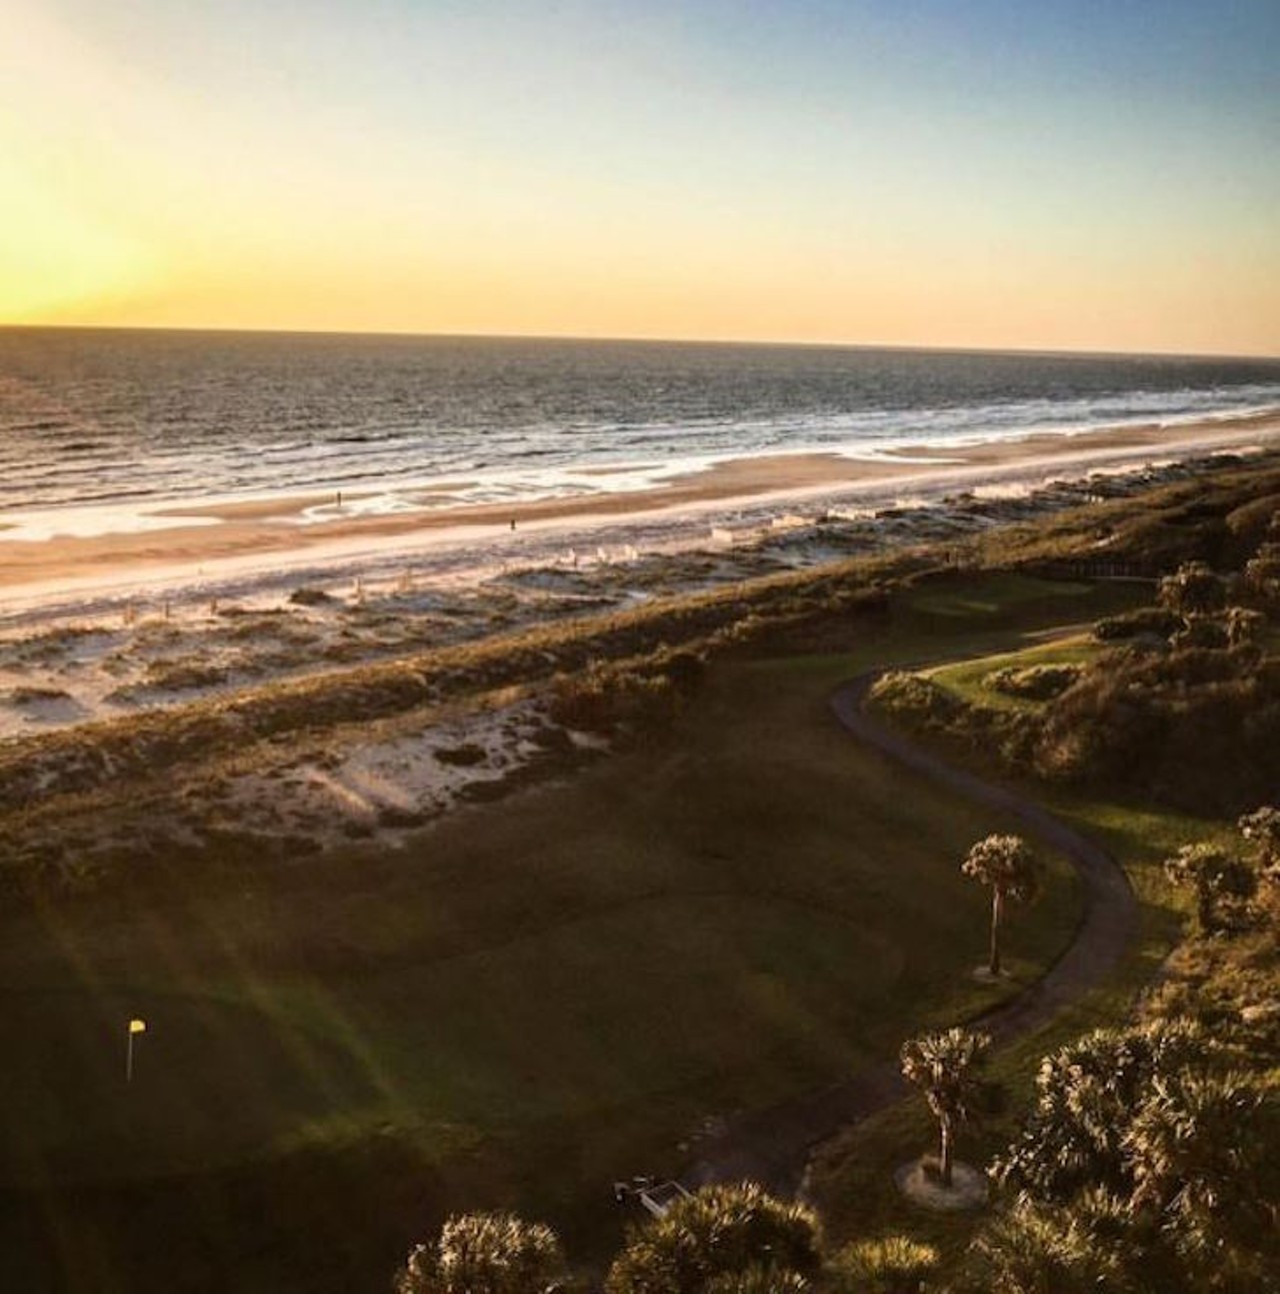 Amelia Island
Driving distance from Orlando: 2 hours 45 minutes 
Amelia Island is must do for any beach enthusiast. The relativity uncrowded beaches are a great jumping off point for SCUBA diving, parasailing or deep sea fishing. 
Photo via 904happyhour?Instagram